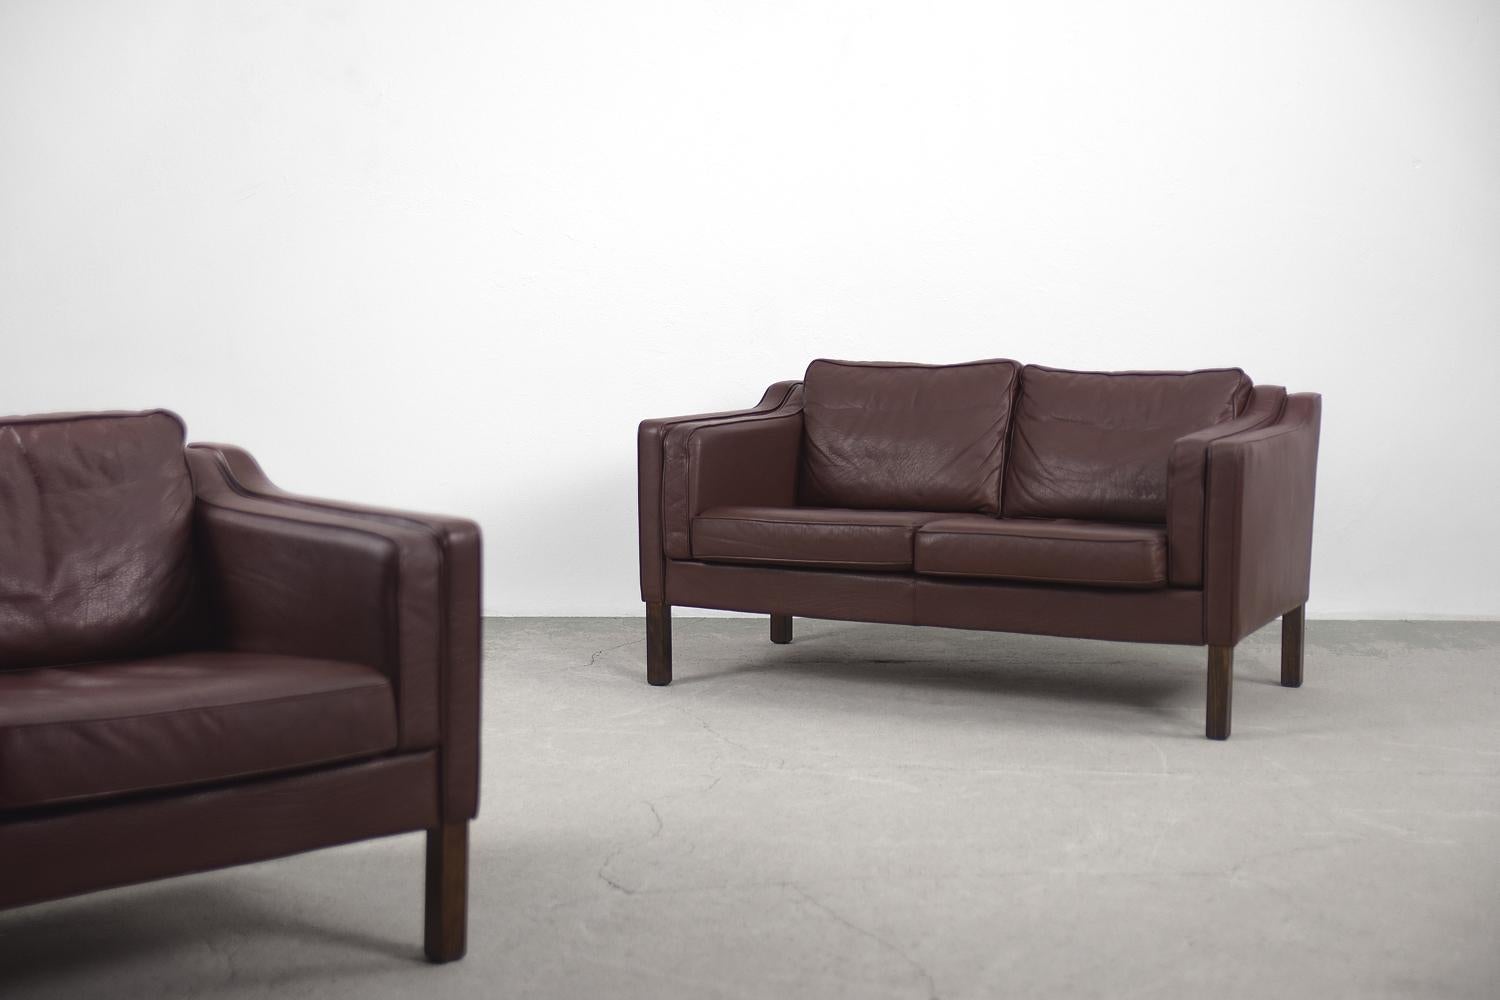 Late 20th Century Pair of Vintage Elegant Mid-century Scandinavian Modern Brown Leather Sofas For Sale